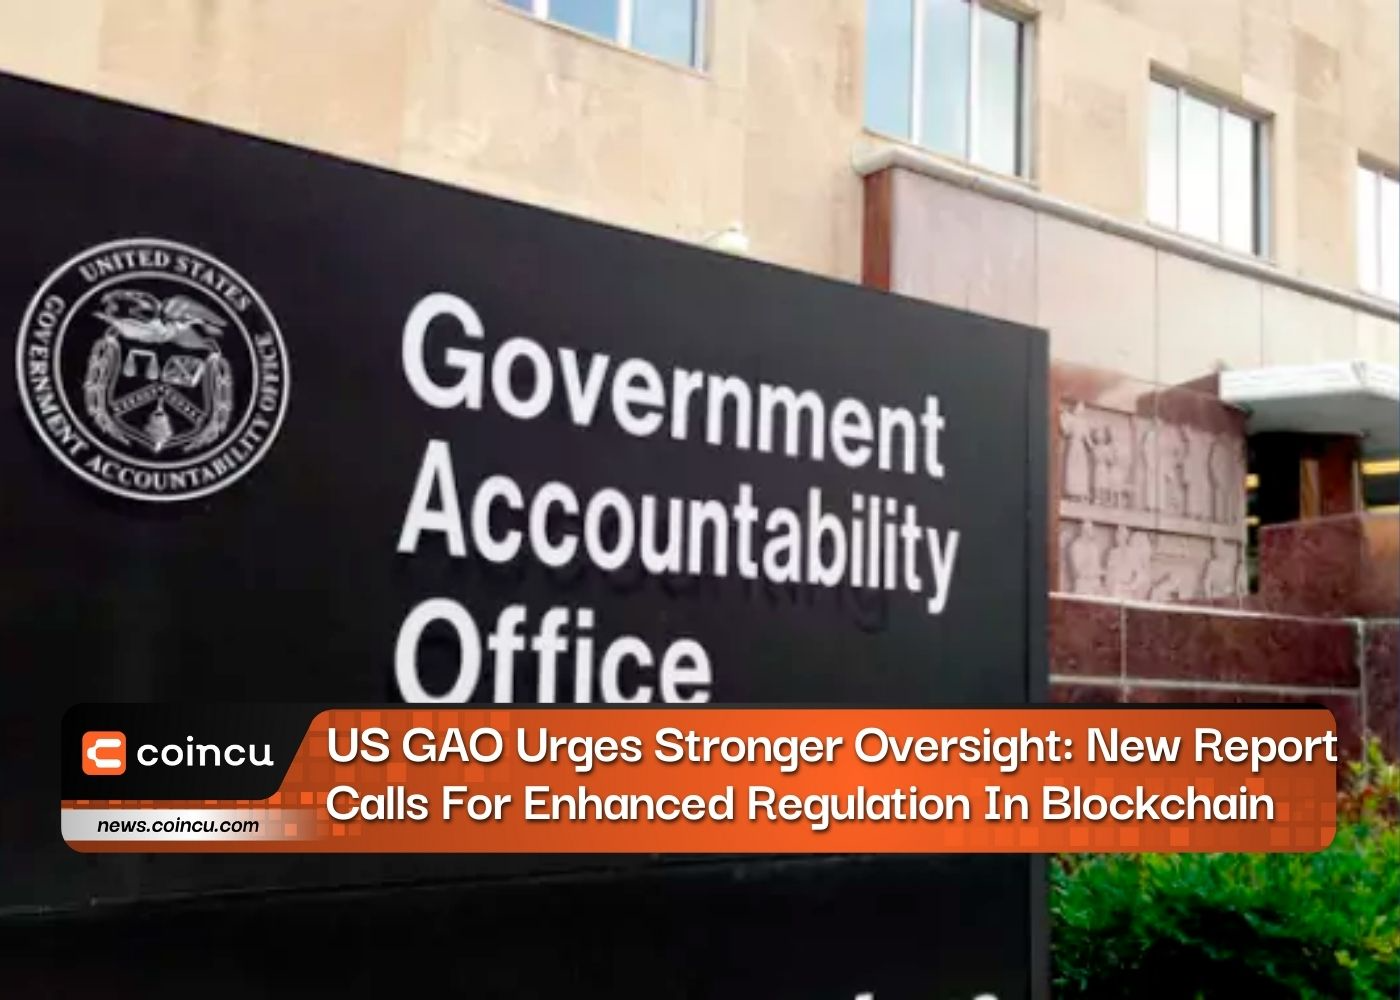 US GAO Urges Stronger Oversight: New Report Calls For Enhanced Regulation In Blockchain